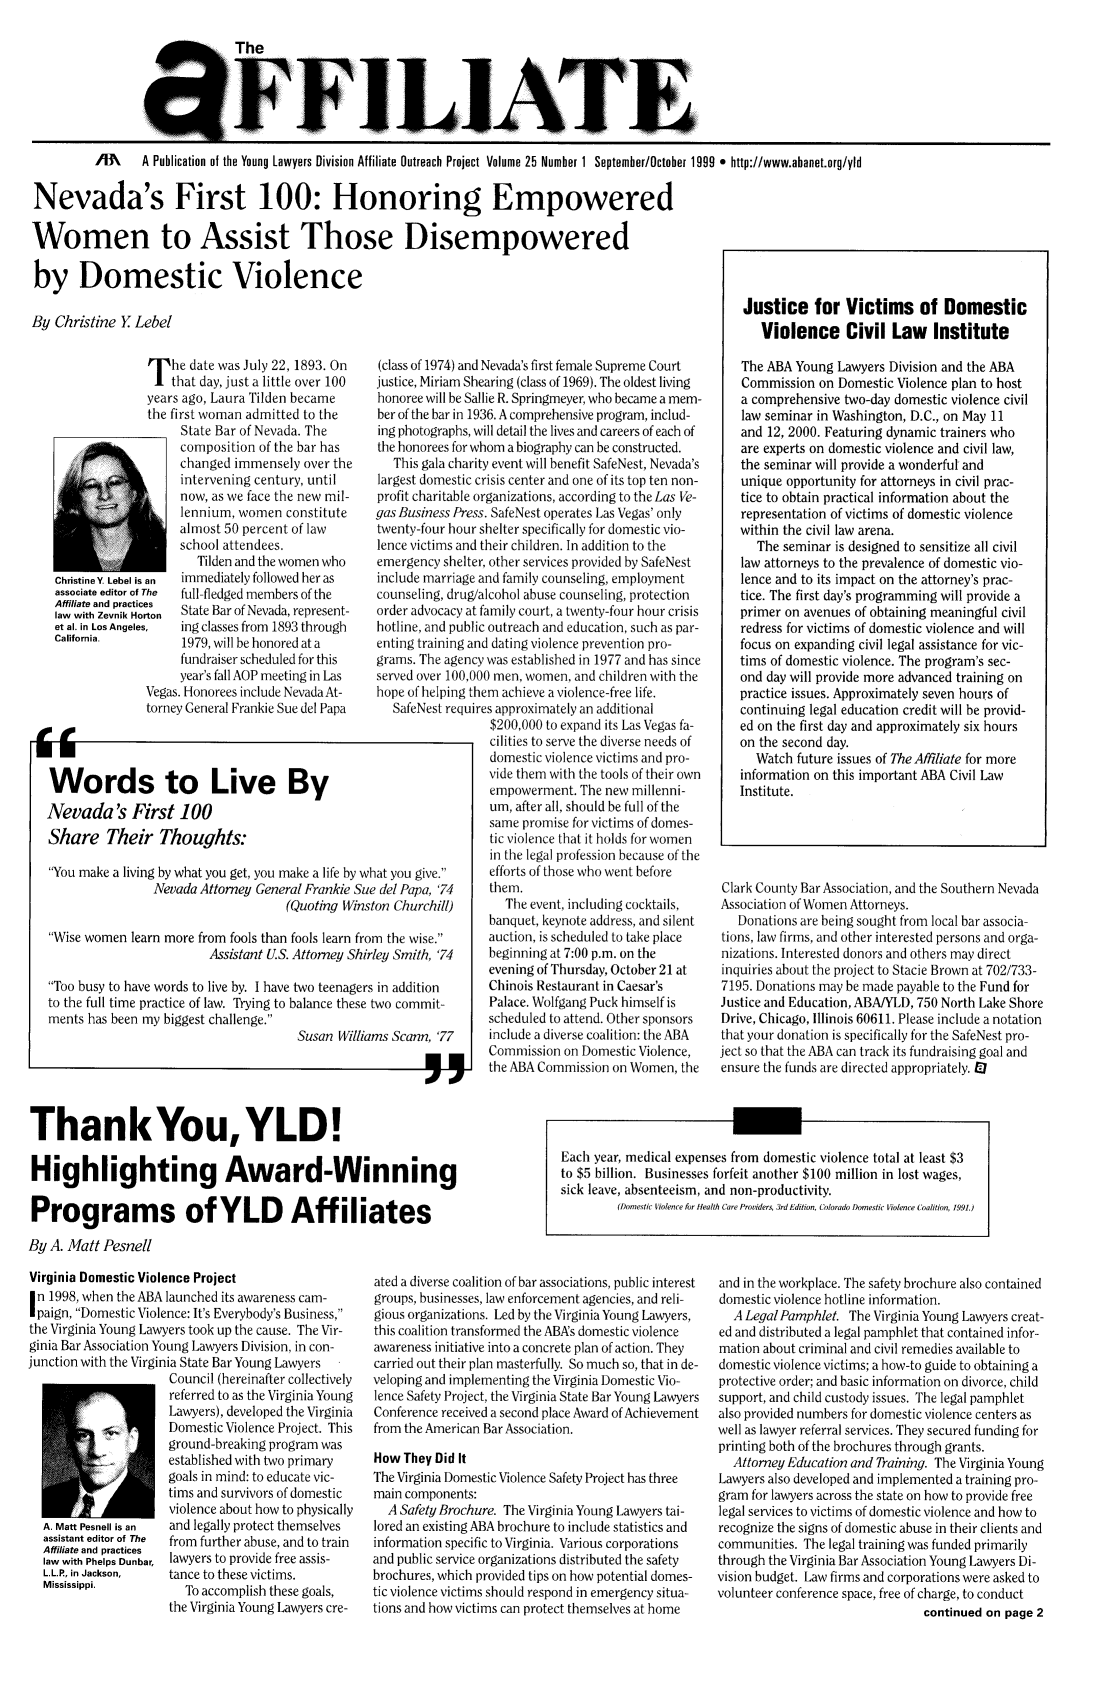 handle is hein.journals/aff25 and id is 1 raw text is: The
FFi..ATE
/M   A Publication of the Young Lawyers Division Affiliate Outreach Project Volume 25 Number 1 September/October 1999 * http://www.abanet.org/yld
Nevada's First 100: Honoring Empowered

Women to Assist Those Disempowered
by Domestic Violence
By Christine  Lebel

T he date was July 22, 1893. On
that day, just a little over 100
years ago, Laura Tilden became
the first woman admitted to the
State Bar of Nevada. The
composition of the bar has
changed immensely over the
intervening century, until
now, as we face the new mil-
lennium, women constitute
almost 50 percent of law
school attendees.
Tilden and the women who
ChristineY. Lebel is an  immediately followed her as
associate editor of The  full-fledged members of the
Affiliate and practices
law with Zevnik Horton  State Bar of Nevada, represent-
et al. in Los Angeles,  ing classes from 1893 through
California.         1979, will be honored at a
fundraiser scheduled for this
year's fall AOP meeting in Las
Vegas. Honorees include Nevada At-
torney General Frankie Sue del Papa
Words to Live By
Nevada's First 100
Share Their Thoughts:
You make a living by what you get, you make a life by wh
Nevada Attorney General Frankie Sue
(Quoting Winst
Wise women learn more from fools than fools learn fror
Assistant U.S. Attorney Shiri
Too busy to have words to live by. I have two teenagers
to the full time practice of law. Trying to balance these
ments has been my biggest challenge.
Susan Williar

(class of 1974) and Nevada's first female Supreme Court
justice, Miriam Shearing (class of 1969). The oldest living
honoree will be Sallie R. Springmeyer, who became a mem-
ber of the bar in 1936. A comprehensive program, includ-
ing photographs, will detail the lives and careers of each of
the honorees for whom a biography can be constructed.
This gala charity event will benefit SafeNest, Nevada's
largest domestic crisis center and one of its top ten non-
profit charitable organizations, according to the Las Ve-
gas Business Press. SafeNest operates Las Vegas' only
twenty-four hour shelter specifically for domestic vio-
lence victims and their children. In addition to the
emergency shelter, other services provided by SafeNest
include marriage and family counseling, employment
counseling, drug/alcohol abuse counseling, protection
order advocacy at family court, a twenty-four hour crisis
hotline, and public outreach and education, such as par-
enting training and dating violence prevention pro-
grams. The agency was established in 1977 and has since
served over 100,000 men, women, and children with the
hope of helping them achieve a violence-free life.
SafeNest requires approximately an additional
$200,000 to expand its Las Vegas fa-
cilities to serve the diverse needs of
domestic violence victims and pro-
vide them with the tools of their own
empowerment. The new millenni-
um, after all, should be full of the
same promise for victims of domes-
tic violence that it holds for women
in the legal profession because of the
hat you give.    efforts of those who went before
?del Papa, '74    them.
ton Churchill)      The event, including cocktails,
banquet, keynote address, and silent
m the wise.      auction, is scheduled to take place
ley Smith, '74   beginning at 7:00 p.m. on the
evening of Thursday, October 21 at
in addition      Chinois Restaurant in Caesar's
two commit-       Palace. Wolfgang Puck himself is
scheduled to attend. Other sponsors
ms Scann, '77     include a diverse coalition: the ABA
Commission on Domestic Violence,
the ABA Commission on Women, the

Justice for Victims of Domestic
Violence Civil Law Institute
The ABA Young Lawyers Division and the ABA
Commission on Domestic Violence plan to host
a comprehensive two-day domestic violence civil
law seminar in Washington, D.C., on May 11
and 12, 2000. Featuring dynamic trainers who
are experts on domestic violence and civil law,
the seminar will provide a wonderful and
unique opportunity for attorneys in civil prac-
tice to obtain practical information about the
representation of victims of domestic violence
within the civil law arena.
The seminar is designed to sensitize all civil
law attorneys to the prevalence of domestic vio-
lence and to its impact on the attorney's prac-
tice. The first day's programming will provide a
primer on avenues of obtaining meaningful civil
redress for victims of domestic violence and will
focus on expanding civil legal assistance for vic-
tims of domestic violence. The program's sec-
ond day will provide more advanced training on
practice issues. Approximately seven hours of
continuing legal education credit will be provid-
ed on the first day and approximately six hours
on the second day.
Watch future issues of The Affiliate for more
information on this important ABA Civil Law
Institute.
Clark County Bar Association, and the Southern Nevada
Association of Women Attorneys.
Donations are being sought from local bar associa-
tions, law firms, and other interested persons and orga-
nizations. Interested donors and others may direct
inquiries about the project to Stacie Brown at 702/733-
7195. Donations may be made payable to the Fund for
Justice and Education, ABAIYLD, 750 North Lake Shore
Drive, Chicago, Illinois 60611. Please include a notation
that your donation is specifically for the SafeNest pro-
ject so that the ABA can track its fundraising goal and
ensure the funds are directed appropriately. El

ThankYou, YLD!
Highlighting Award-Winning
Programs of YLD Affiliates
By A. Matt Pesnell

Virginia Domestic Violence Project
n 1998, when the ABA launched its awareness cam-
paign, Domestic Violence: It's Everybody's Business,
the Virginia Young Lawyers took up the cause. The Vir-
ginia Bar Association Young Lawyers Division, in con-
junction with the Virginia State Bar Young Lawyers
Council (hereinafter collectively
referred to as the Virginia Young
Lawyers), developed the Virginia
Domestic Violence Project. This
ground-breaking program was
established with two primary
goals in mind: to educate vic-
tims and survivors of domestic
violence about how to physically
A. Matt Pesnell is an  and legally protect themselves
assistant editor of The  from further abuse, and to train
Affiliate and practices
law with Phelps Dunbar, lawyers to provide free assis-
L.L.P., in Jackson,  tance to these victims.
Mississippi.           To accomplish these goals,
the Virginia Young Lawyers cre-

ated a diverse coalition of bar associations, public interest
groups, businesses, law enforcement agencies, and reli-
gious organizations. Led by the Virginia Young Lawyers,
this coalition transformed the ABAs domestic violence
awareness initiative into a concrete plan of action. They
carried out their plan masterfully. So much so, that in de-
veloping and implementing the Virginia Domestic Vio-
lence Safety Project, the Virginia State Bar Young Lawyers
Conference received a second place Award of Achievement
from the American Bar Association.
How They Did It
The Virginia Domestic Violence Safety Project has three
main components:
A Safety Brochure. The Virginia Young Lawyers tai-
lored an existing ABA brochure to include statistics and
information specific to Virginia. Various corporations
and public service organizations distributed the safety
brochures, which provided tips on how potential domes-
tic violence victims should respond in emergency situa-
tions and how victims can protect themselves at home

and in the workplace. The safety brochure also contained
domestic violence hotline information.
A LegalPamphlet. The Virginia Young Lawyers creat-
ed and distributed a legal pamphlet that contained infor-
mation about criminal and civil remedies available to
domestic violence victims; a how-to guide to obtaining a
protective order; and basic information on divorce, child
support, and child custody issues. The legal pamphlet
also provided numbers for domestic violence centers as
well as lawyer referral services. They secured funding for
printing both of the brochures through grants.
Attorney Education and TRaining. The Virginia Young
Lawyers also developed and implemented a training pro-
gram for lawyers across the state on how to provide free
legal services to victims of domestic violence and how to
recognize the signs of domestic abuse in their clients and
communities. The legal training was funded primarily
through the Virginia Bar Association Young Lawyers Di-
vision budget. Law firms and corporations were asked to
volunteer conference space, free of charge, to conduct
continued on page 2

Each year, medical expenses from domestic violence total at least $3
to $5 billion. Businesses forfeit another $100 million in lost wages,
sick leave, absenteeism, and non-productivity.
(Domestic Violence for Health Care Providers, 3rd Edition, Colorado Domestic Violence Coalition, 1991.)


